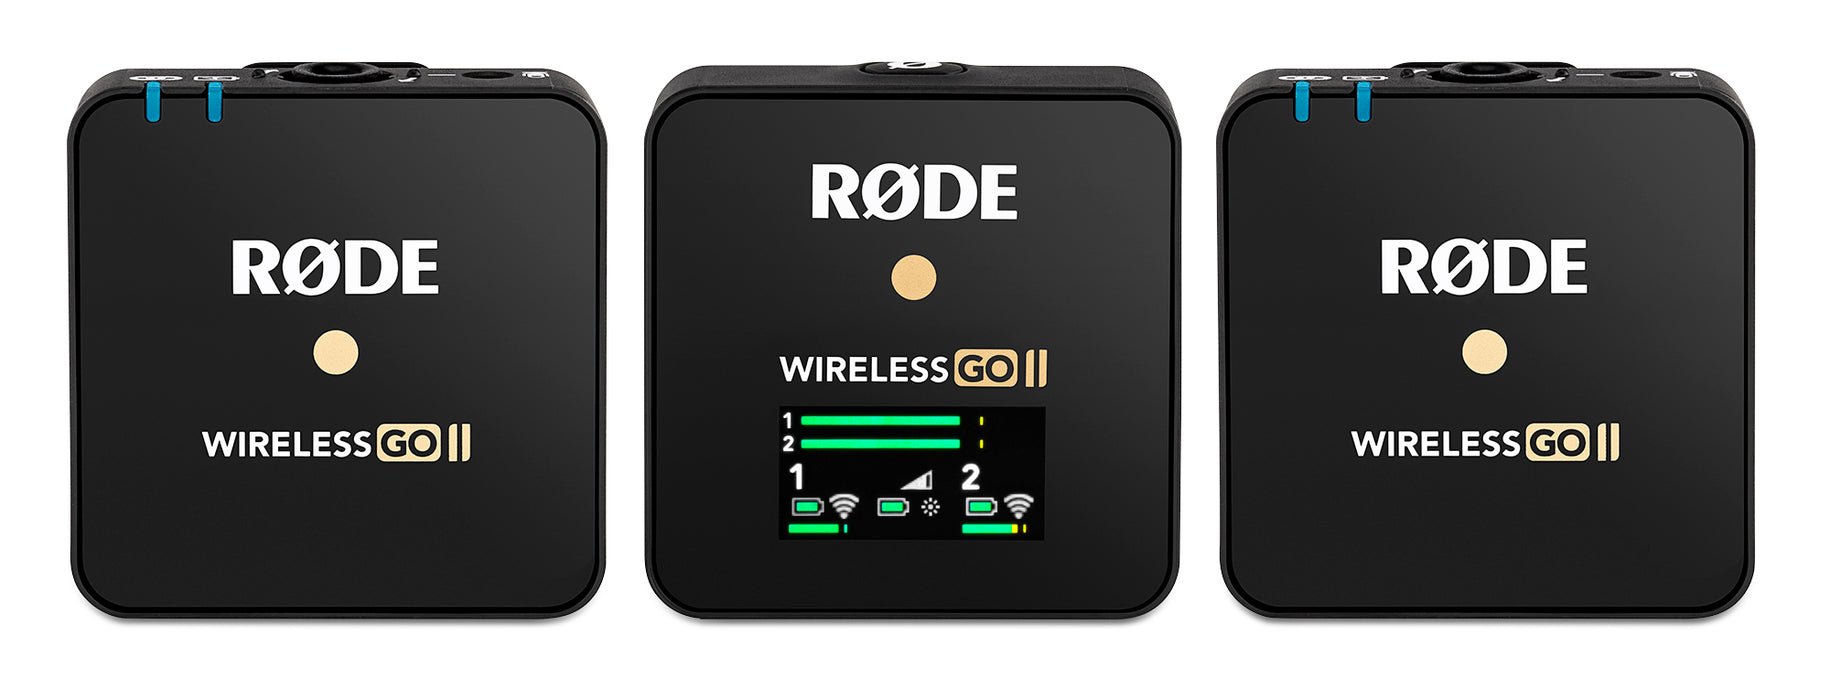 RØDE's Wireless PRO: Compact & Mighty Wireless Microphone